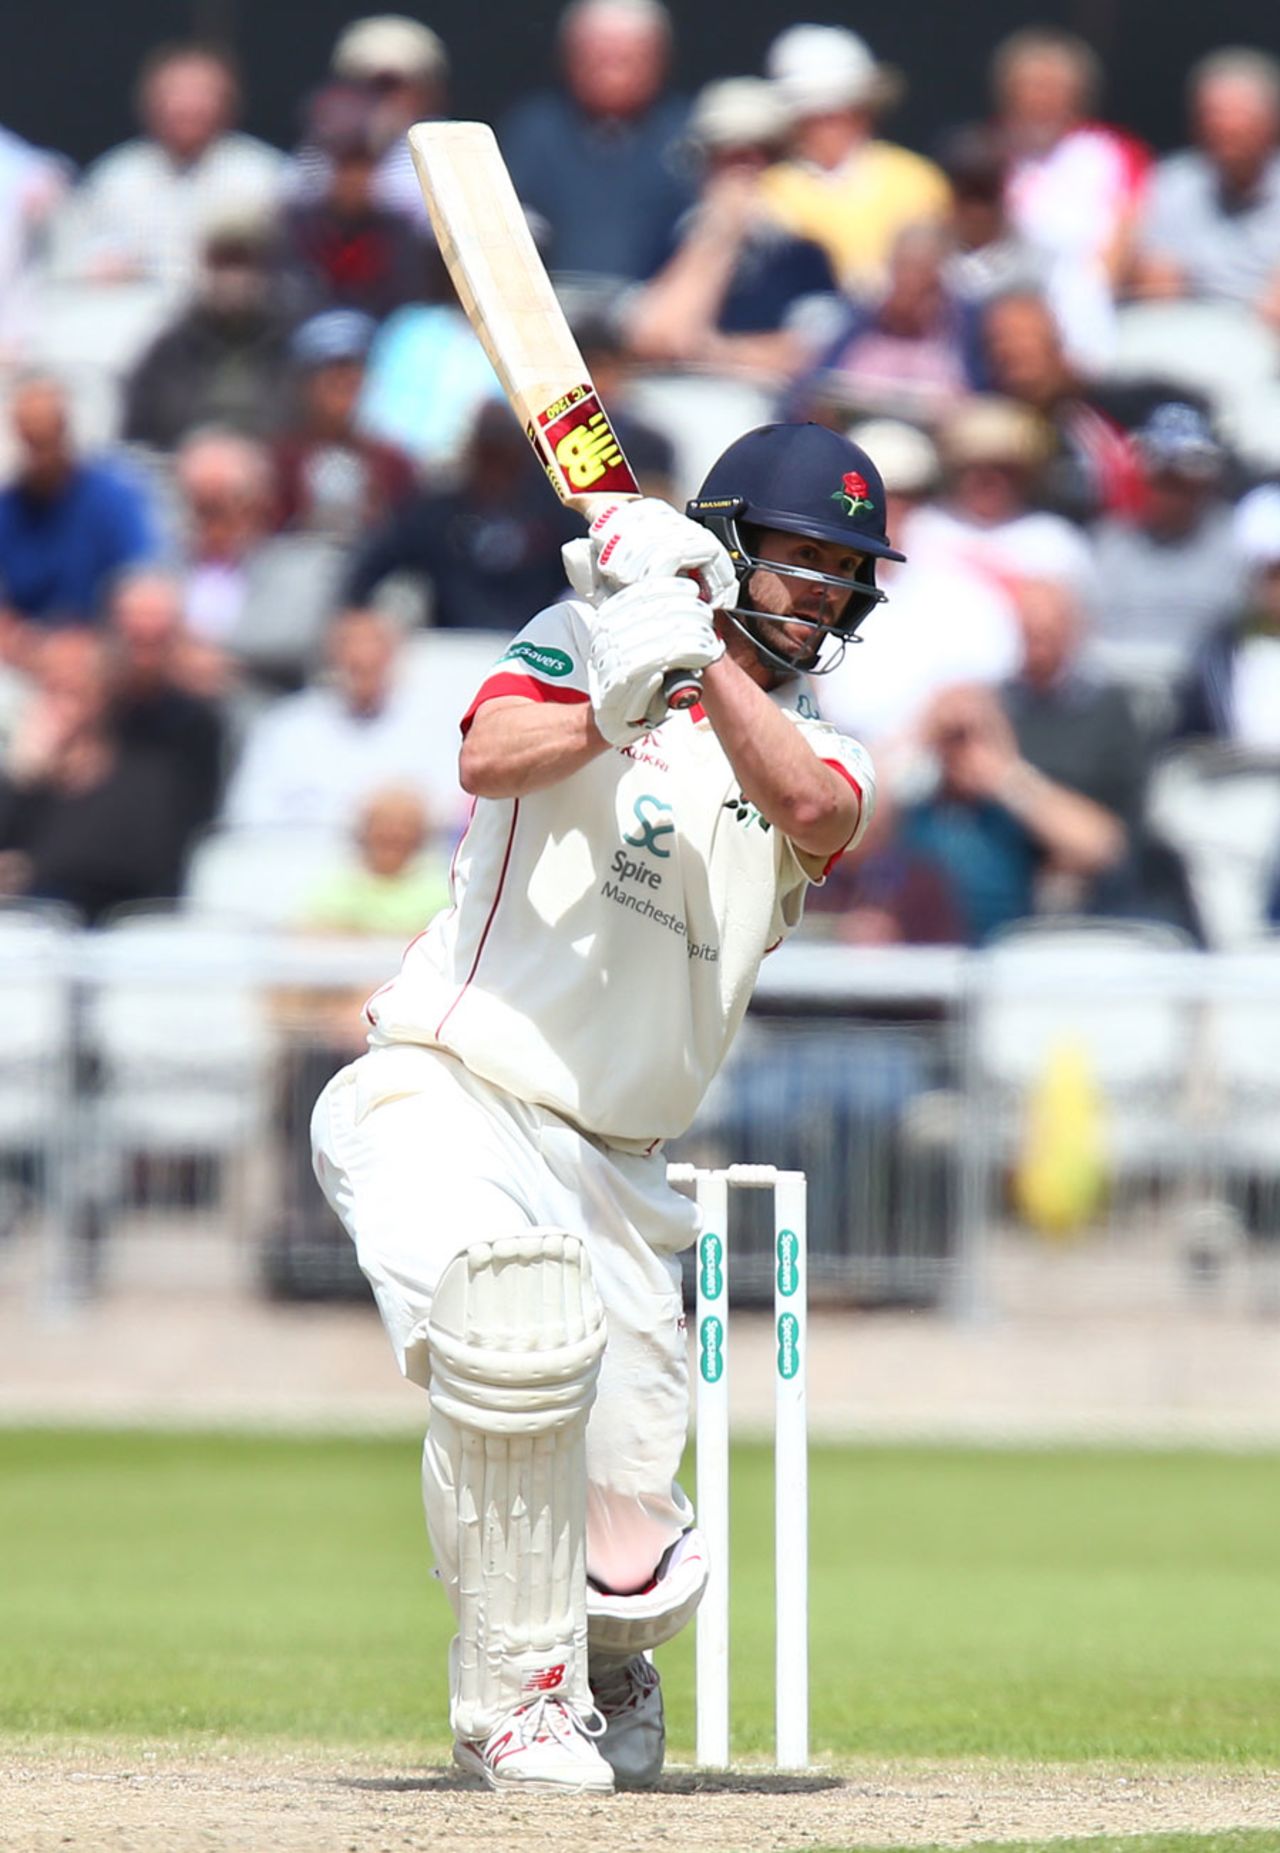 Tom Smith struck a fifty opening the batting on his comeback, Lancashire v Surrey, County Championship, Division One, Old Trafford, 2nd day, May 23, 3016